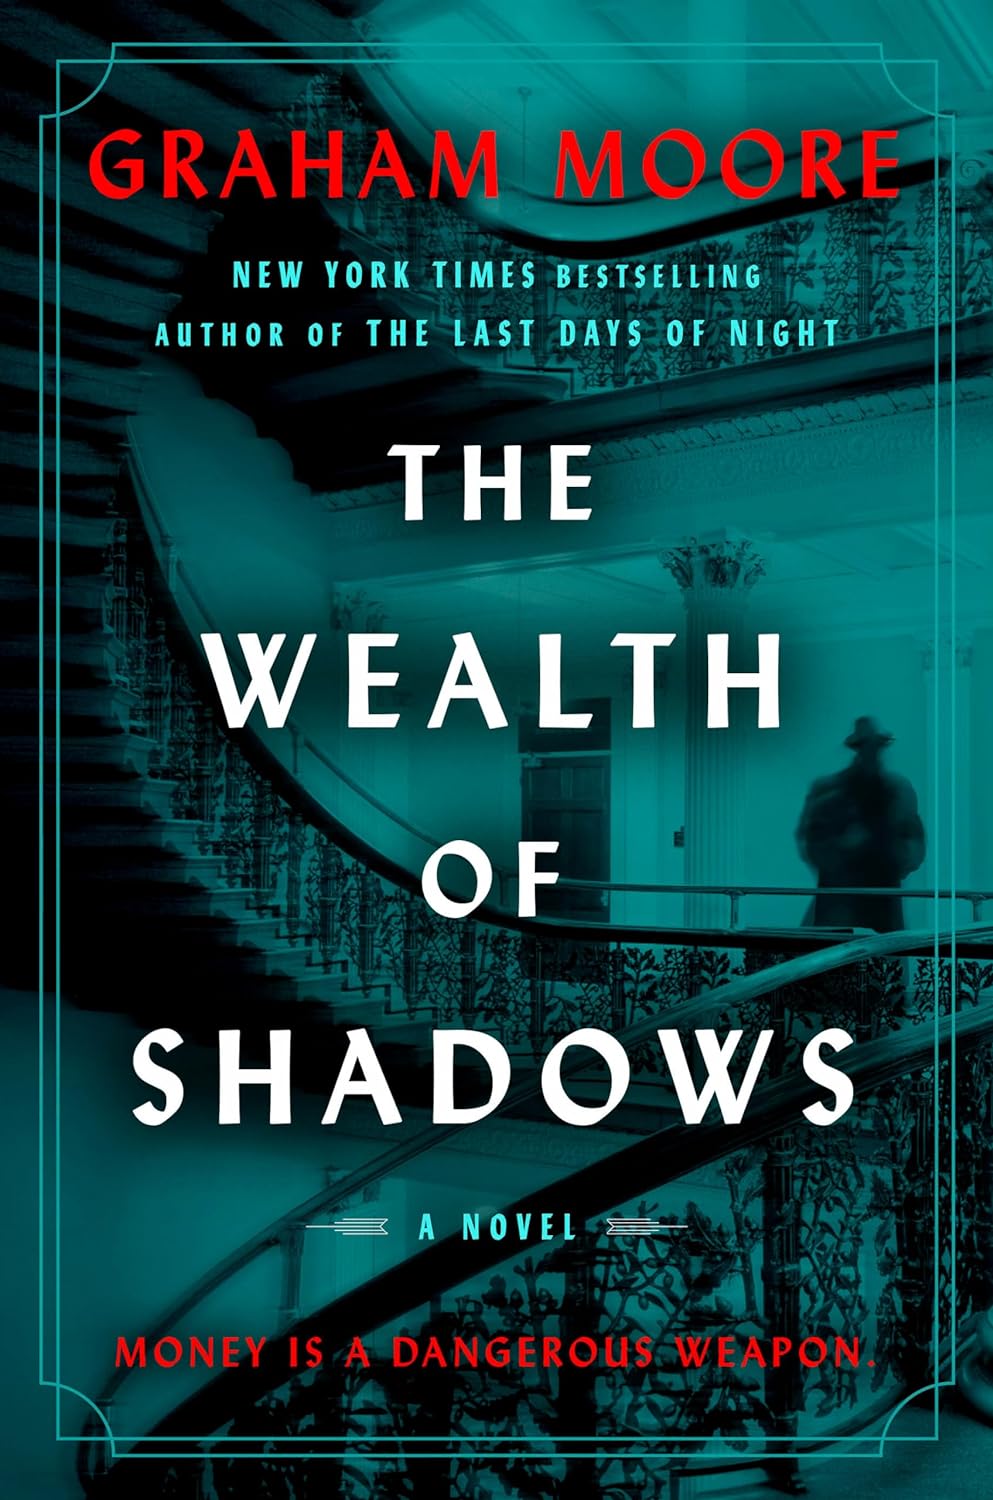 Image for "The Wealth of Shadows"